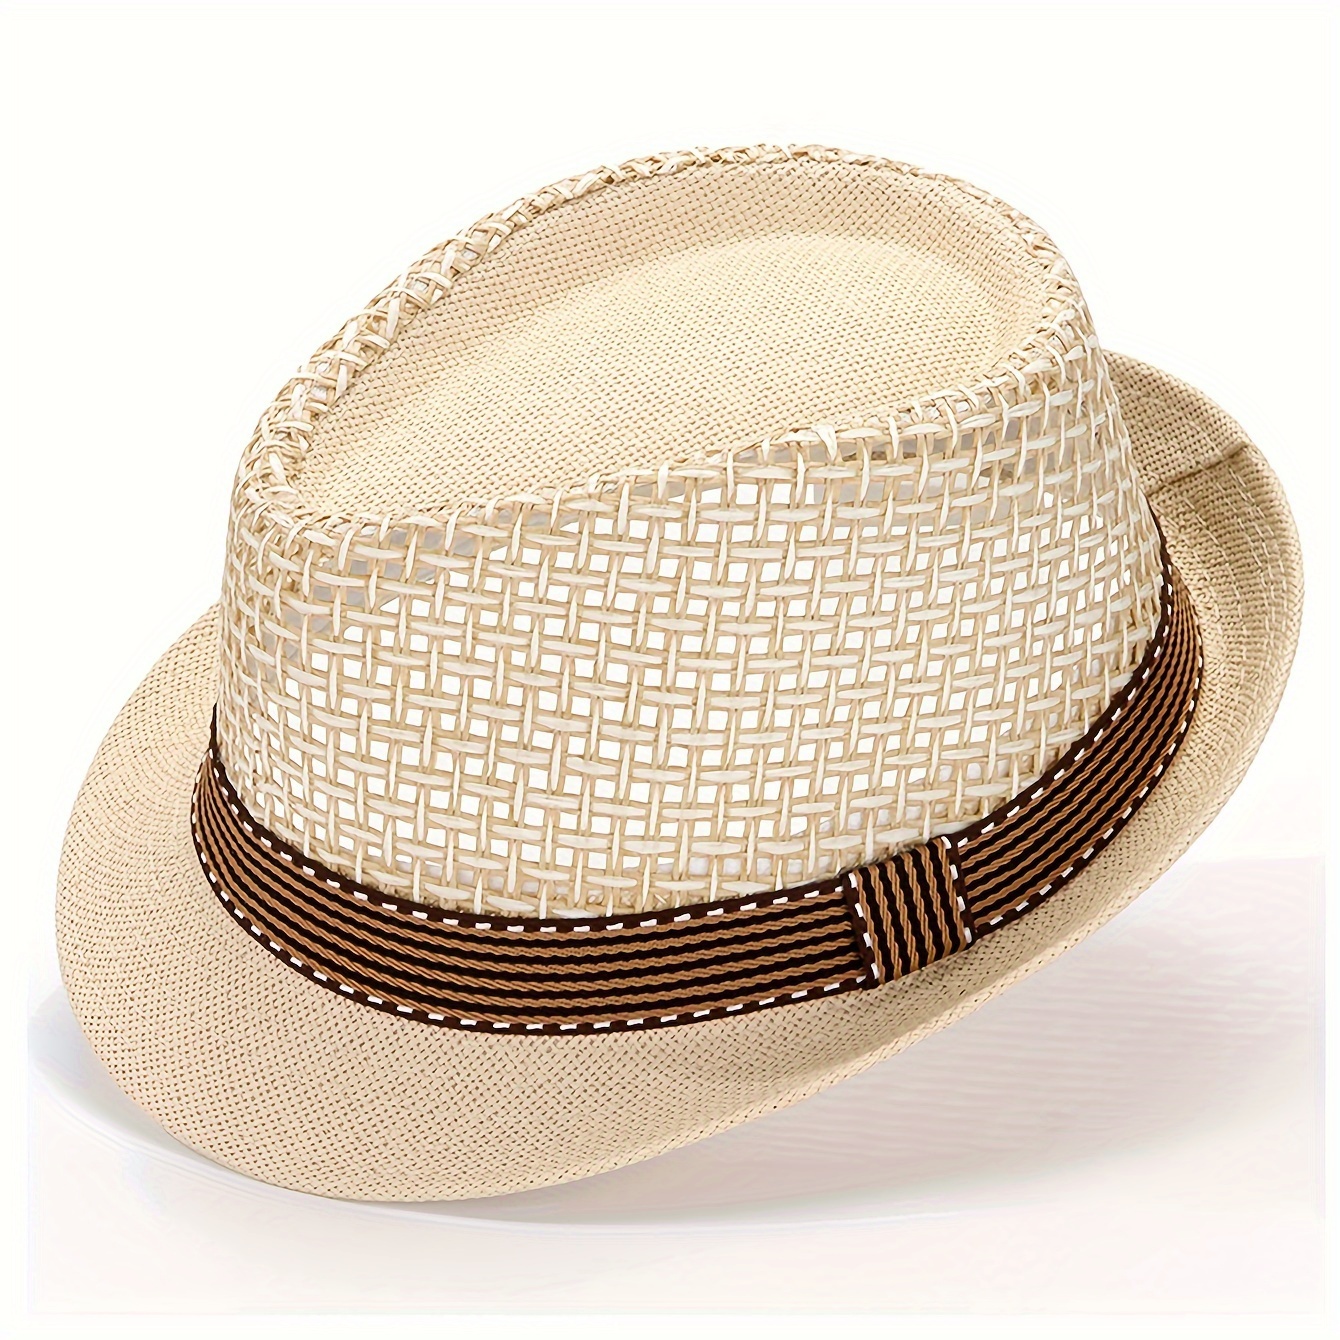 Stylish Men's Summer Hat With Mesh Design For Sun Protection. Ideal For  Elderly People And Grandpas For Outdoor Wear.